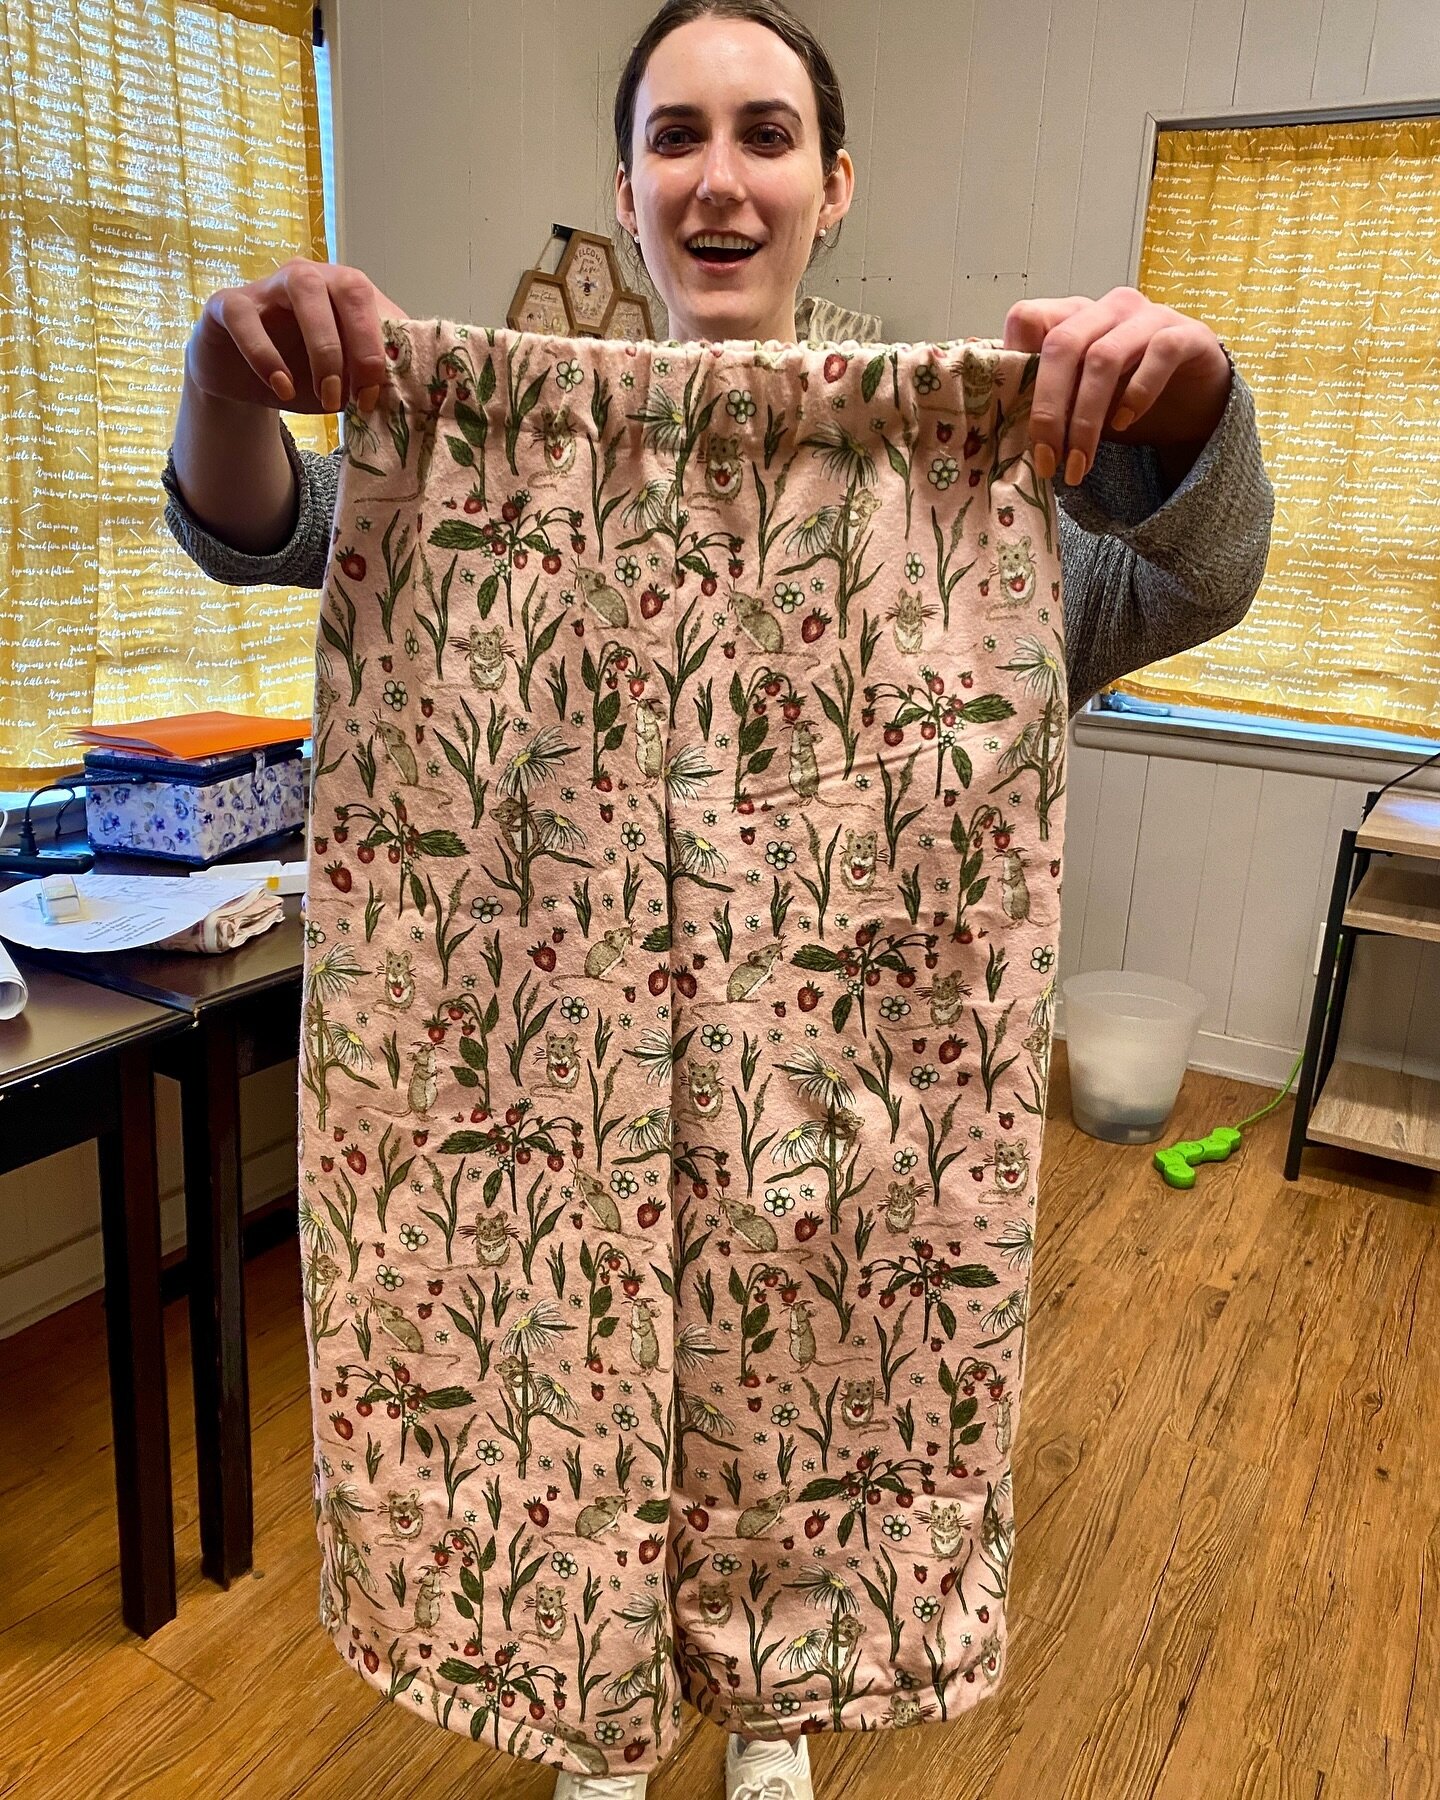 Aren&rsquo;t these capris jammies cute?! Em made these with the @patternsforpirates #walktheplankpjs pattern. We love this free downloadable pattern! #sewsomeloungepants #howdoyousewpants #whomademyclothes